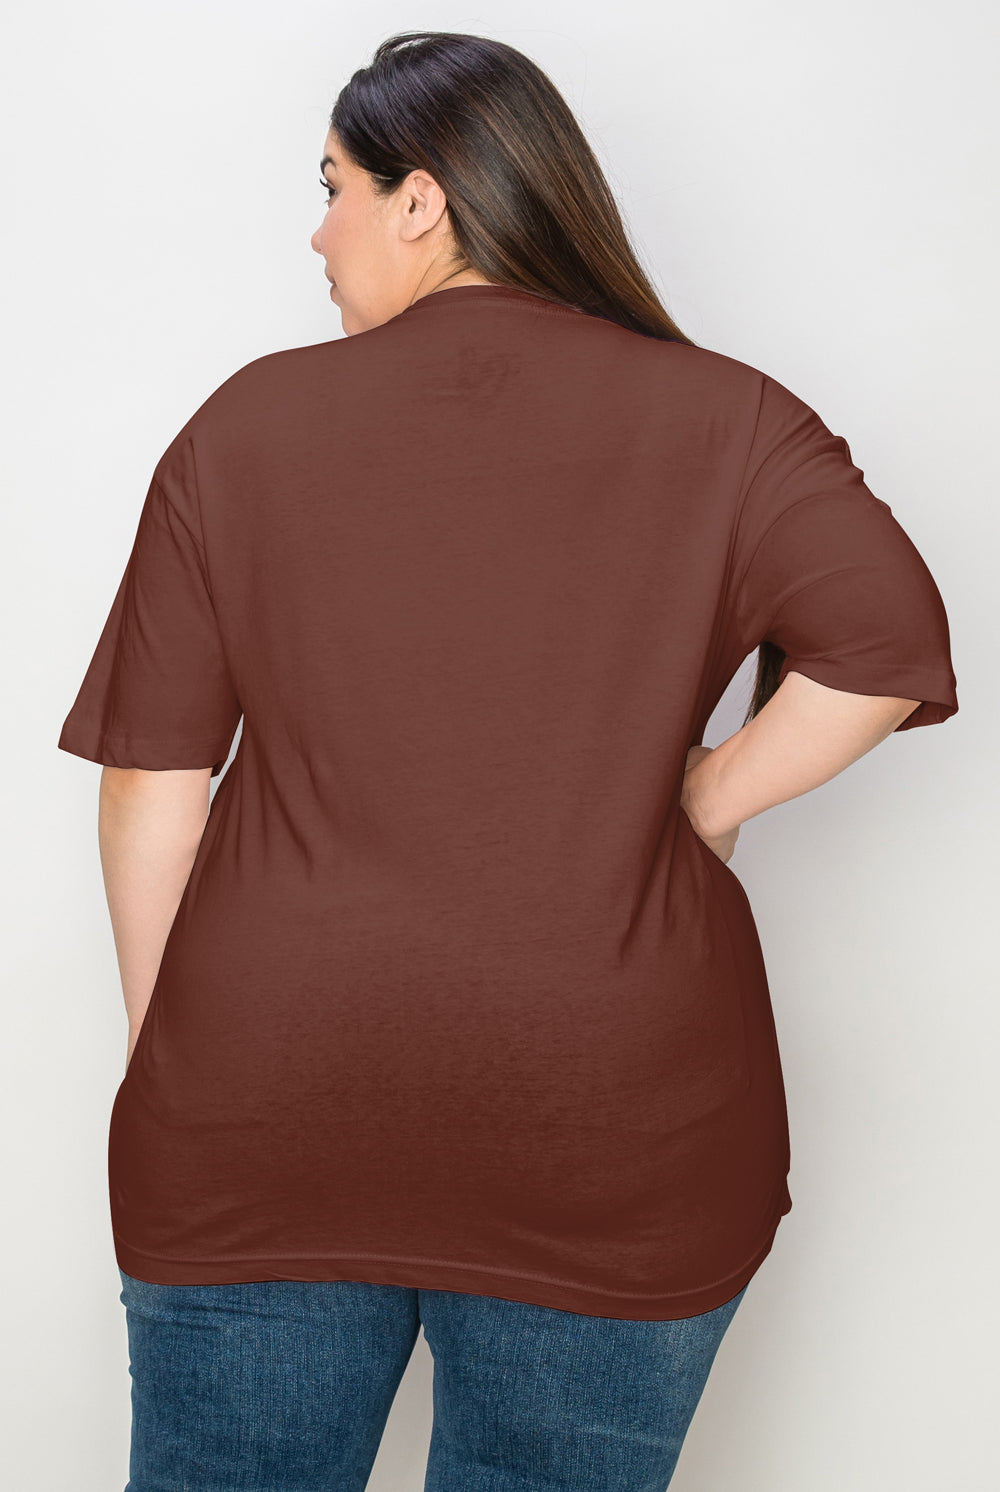 model showing the back of the full size graphic t-shirt from Gem Threads Boutique